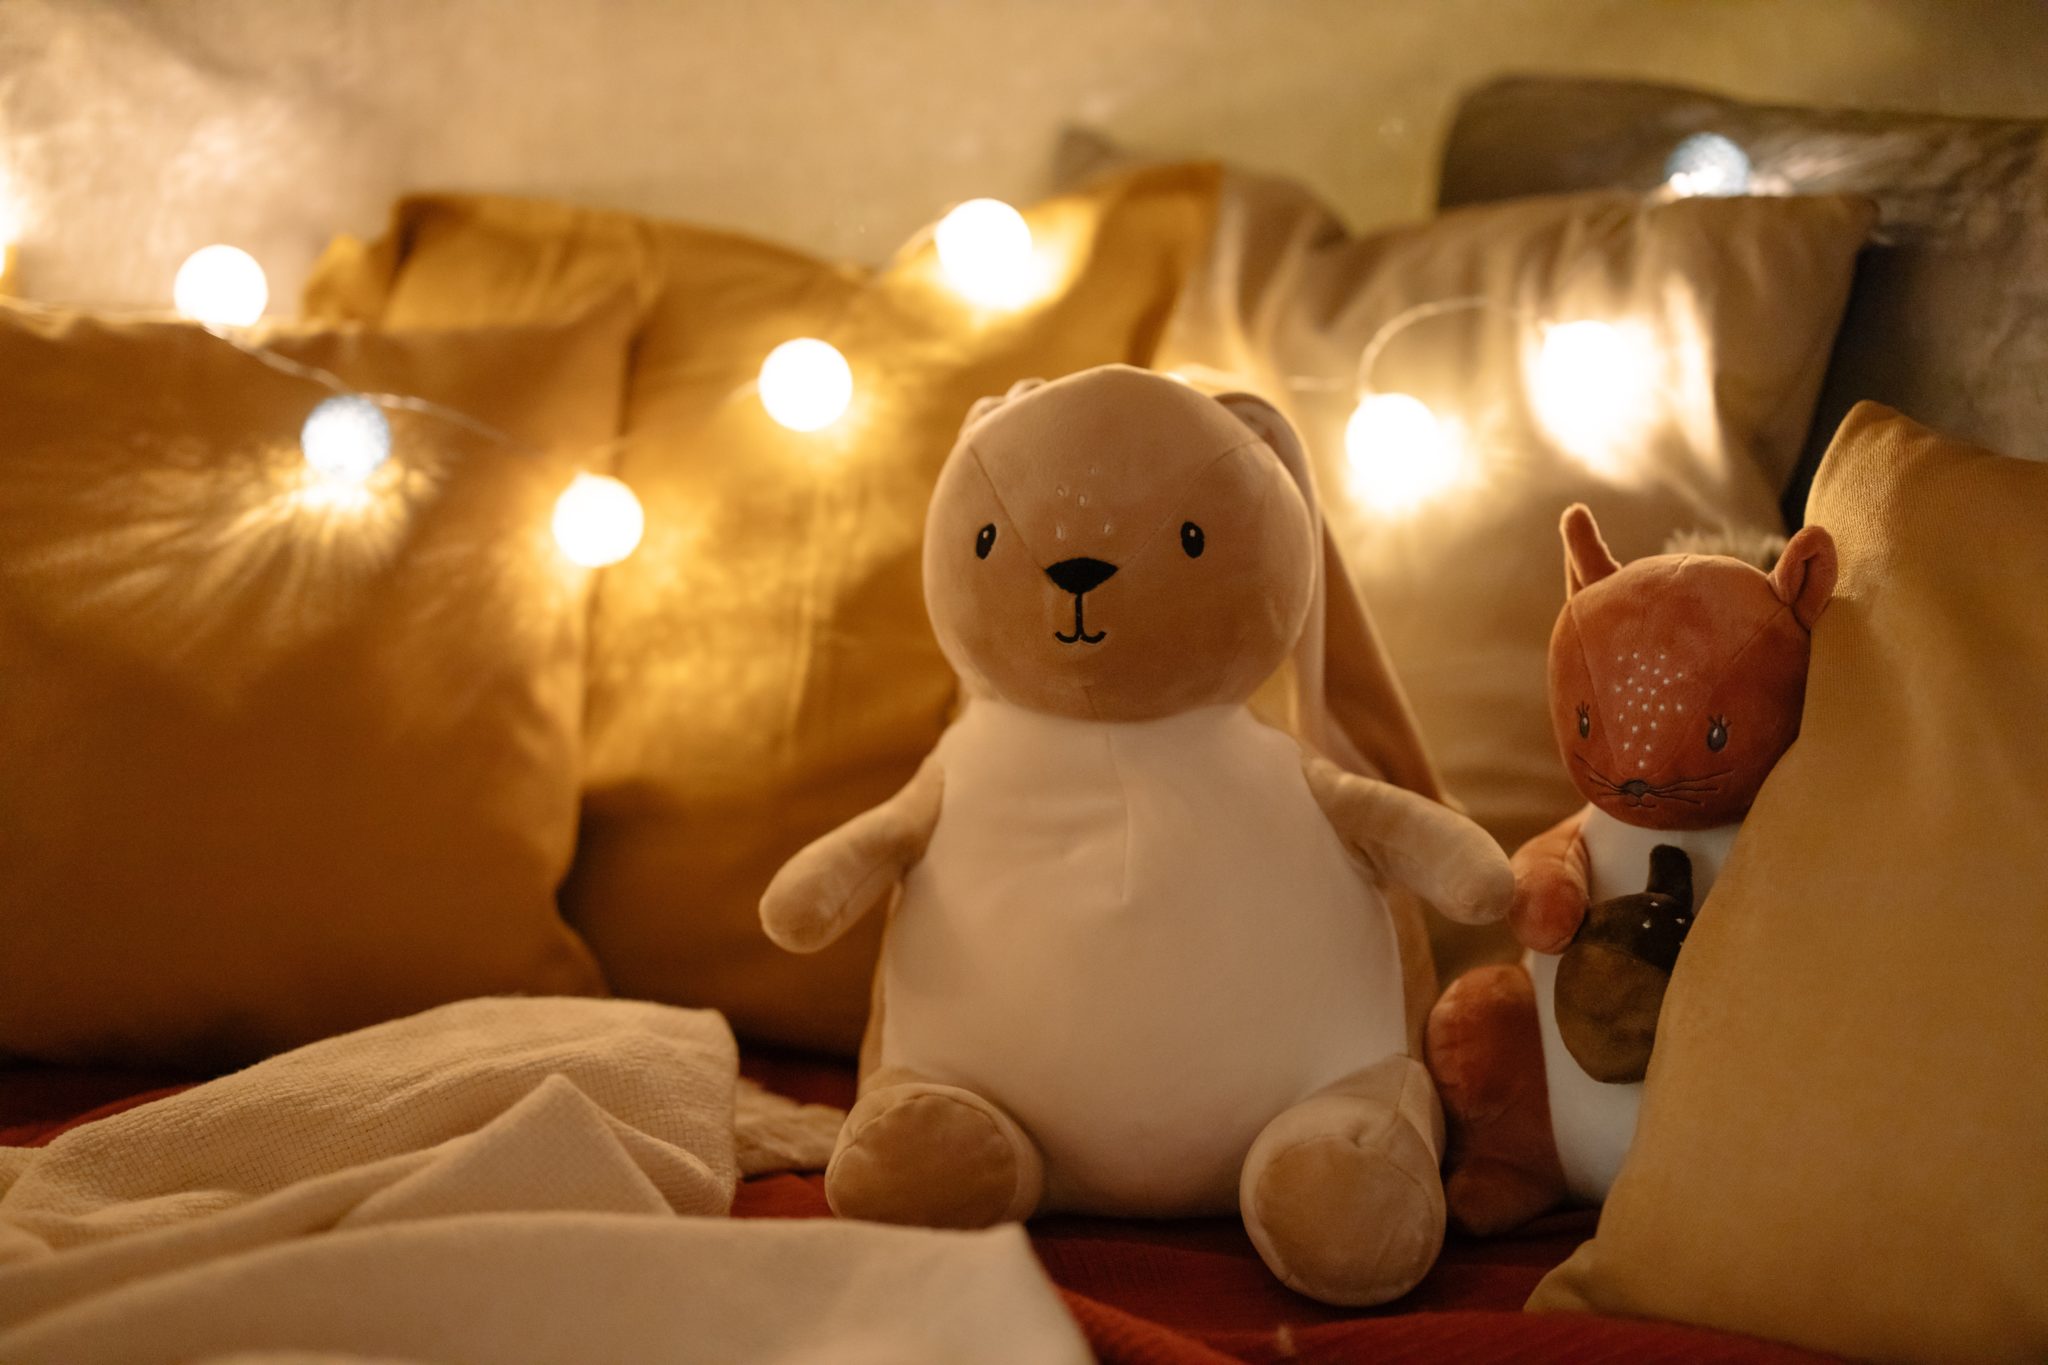 A stuffed bear and a stuffed squirrel sit in a cozy pile of blankets and pillows. Round string lights are draped across the scene. 